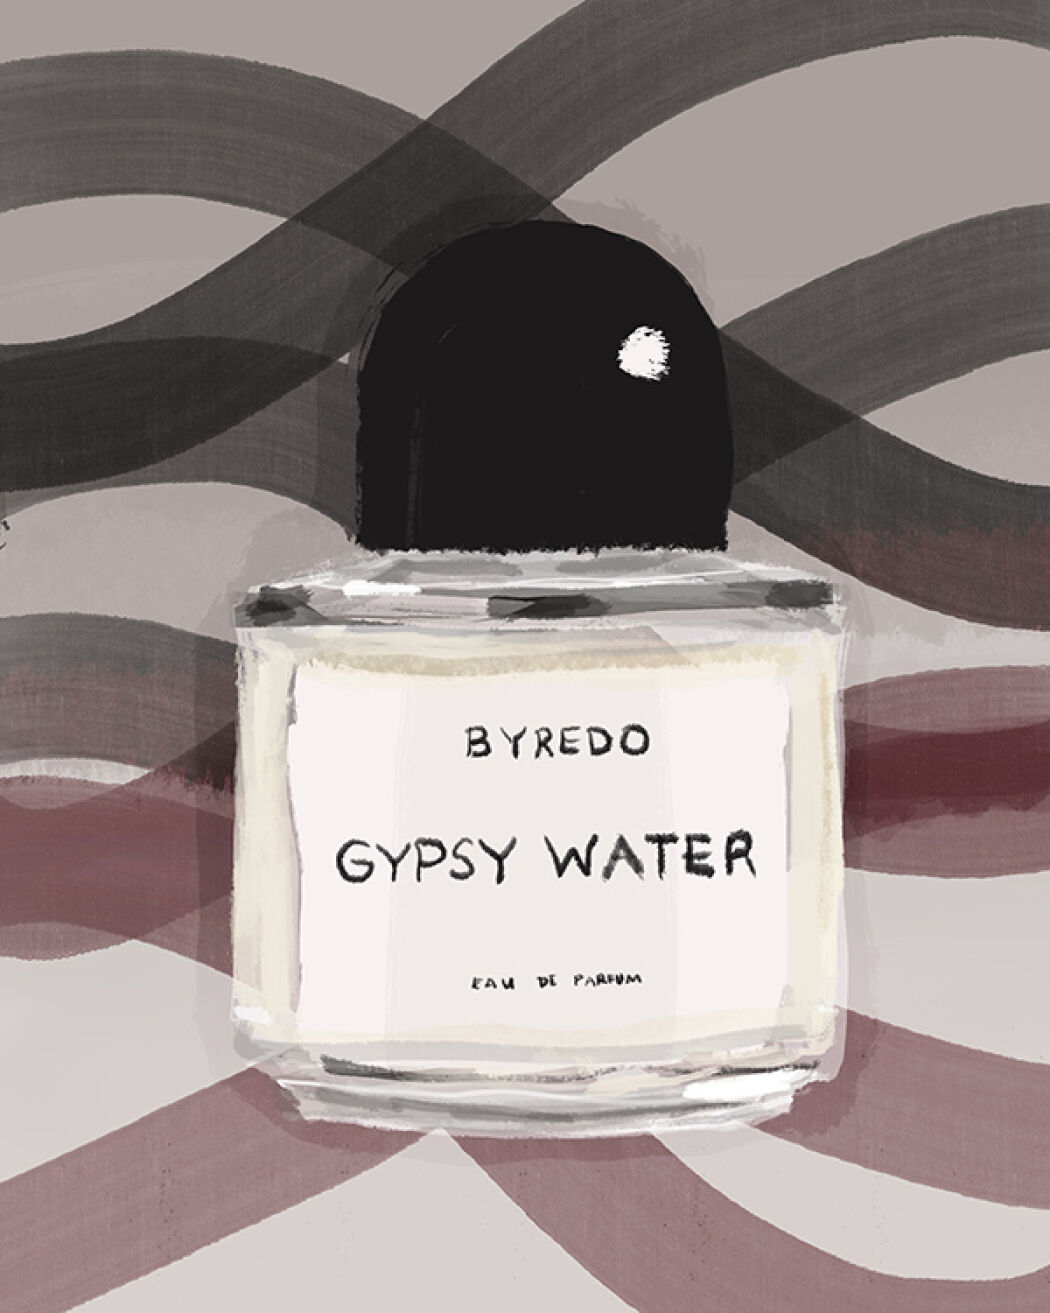 Packaging and fragrance campaign illustration by Christina Gliha Byredo